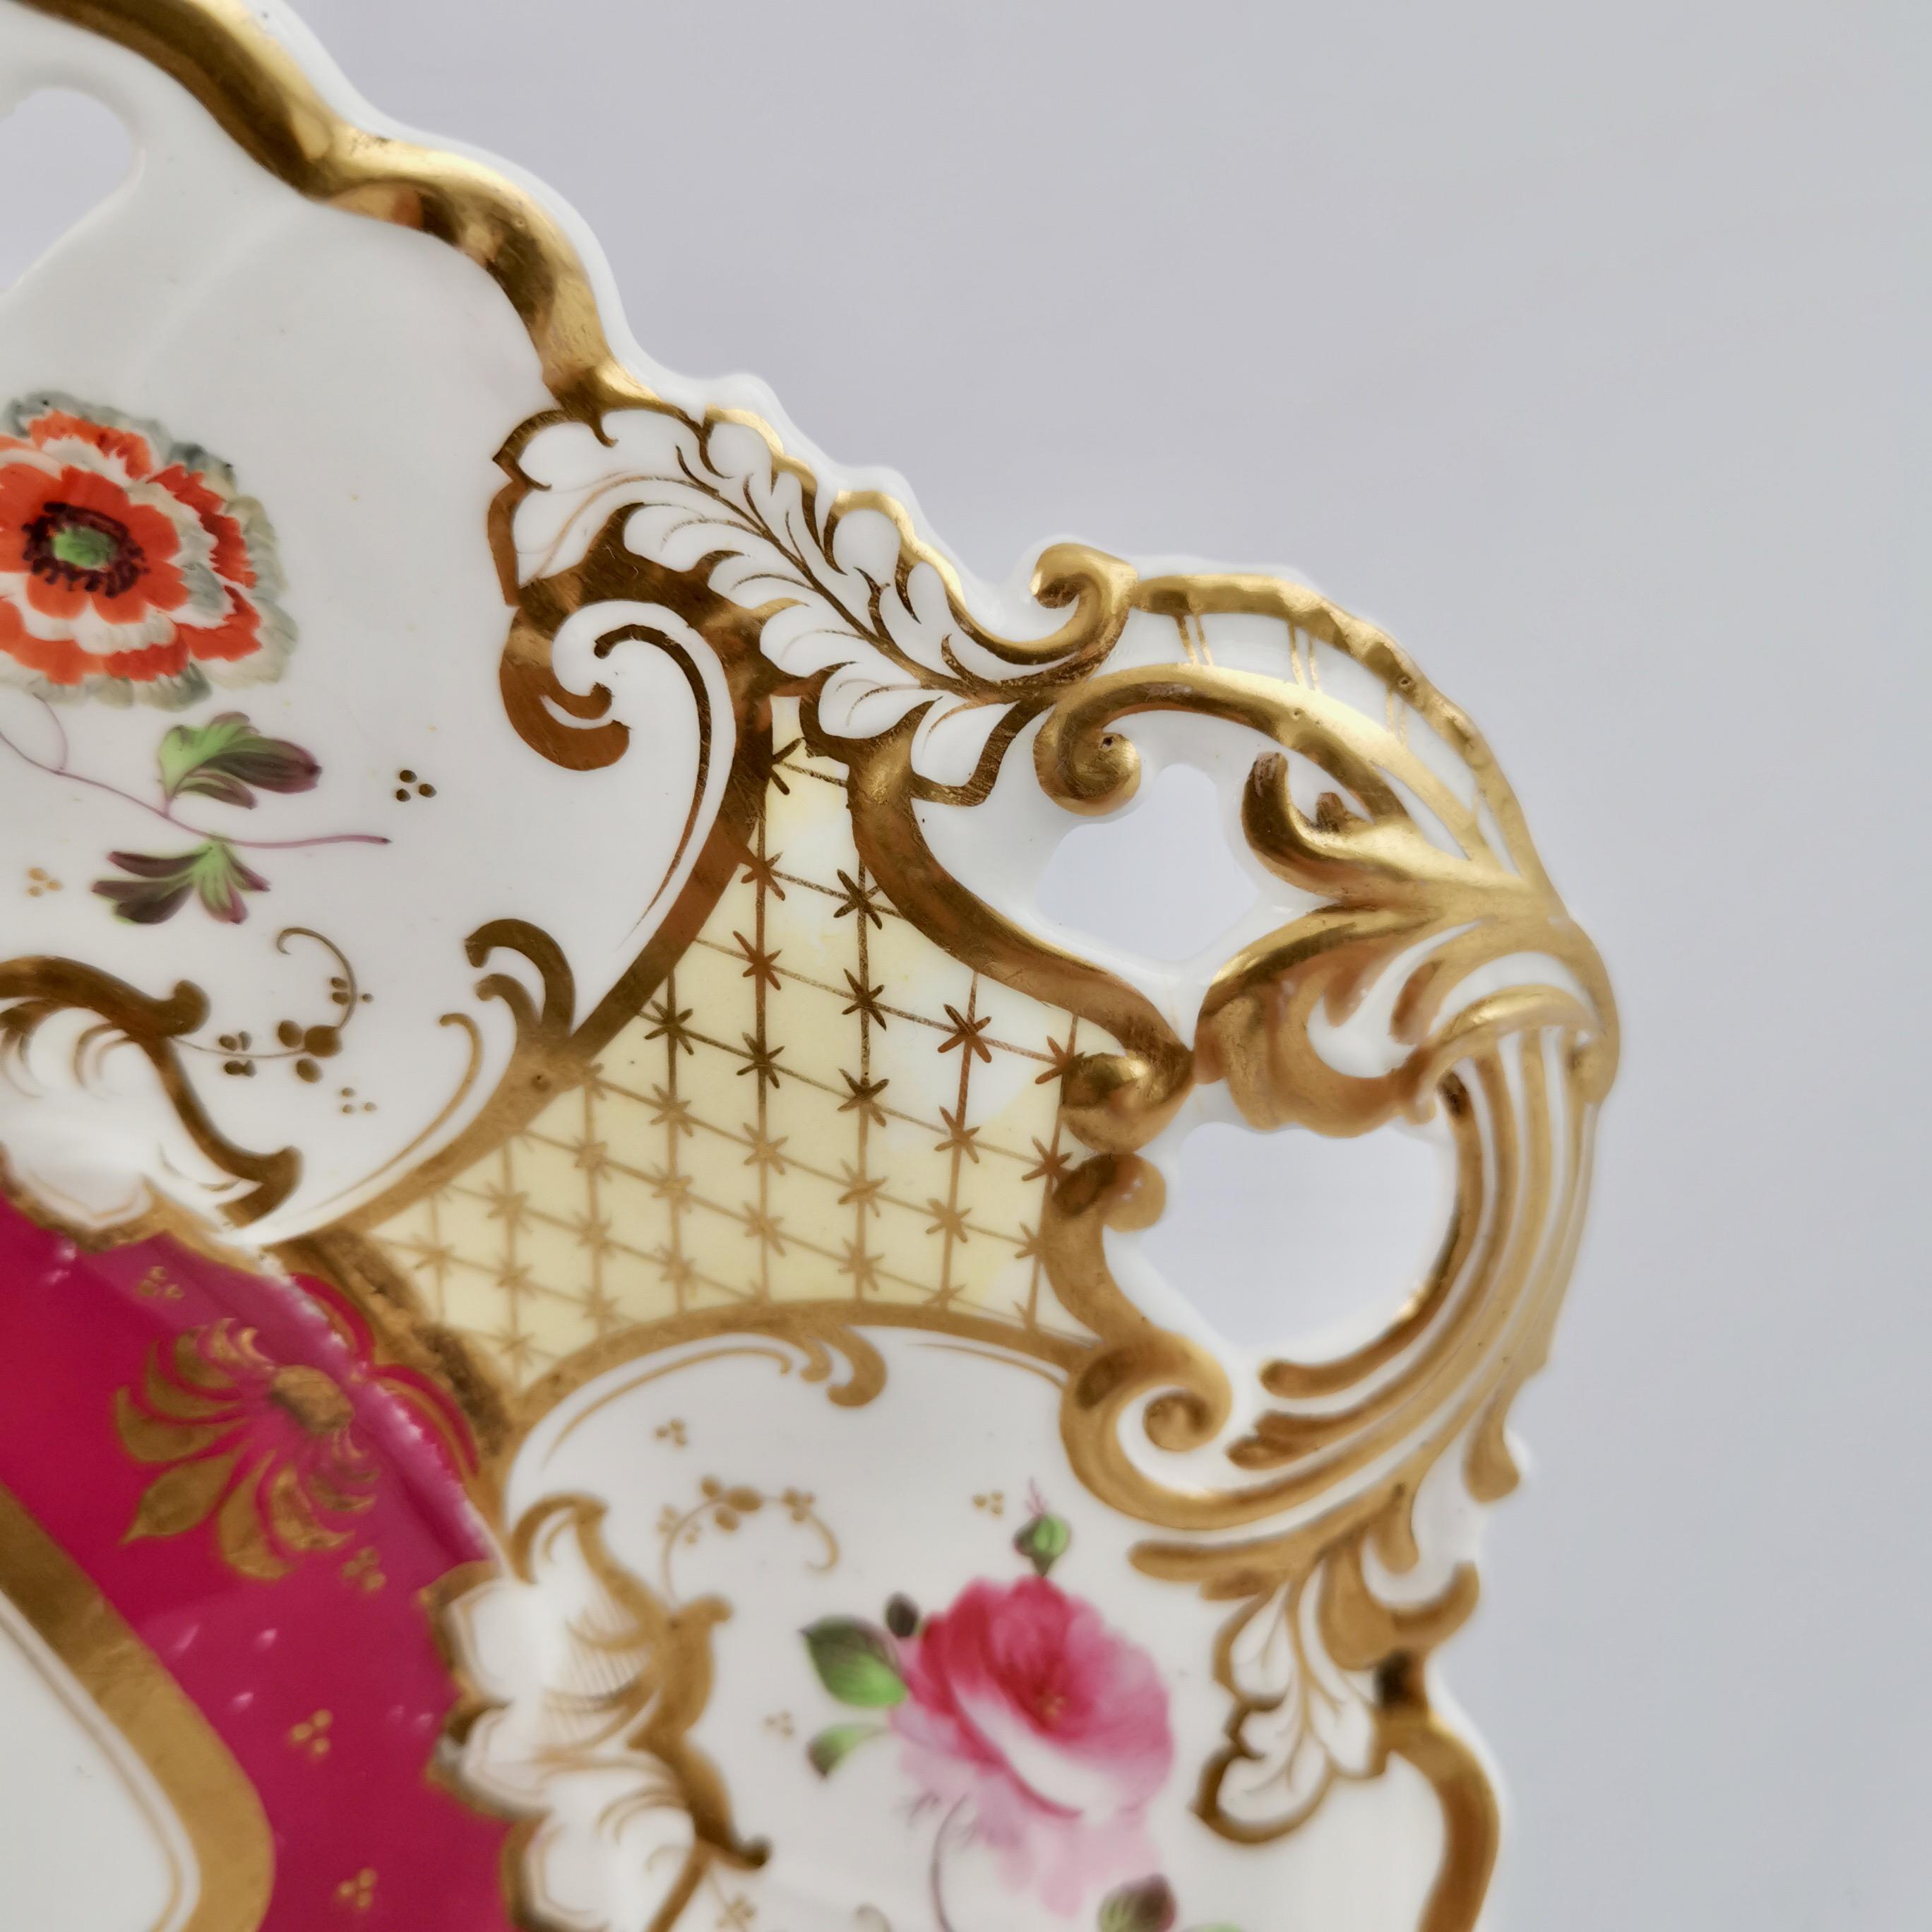 Mid-19th Century Samuel Alcock Porcelain Dish, Maroon, Gilt and Flowers, Rococo Revival, ca 1835